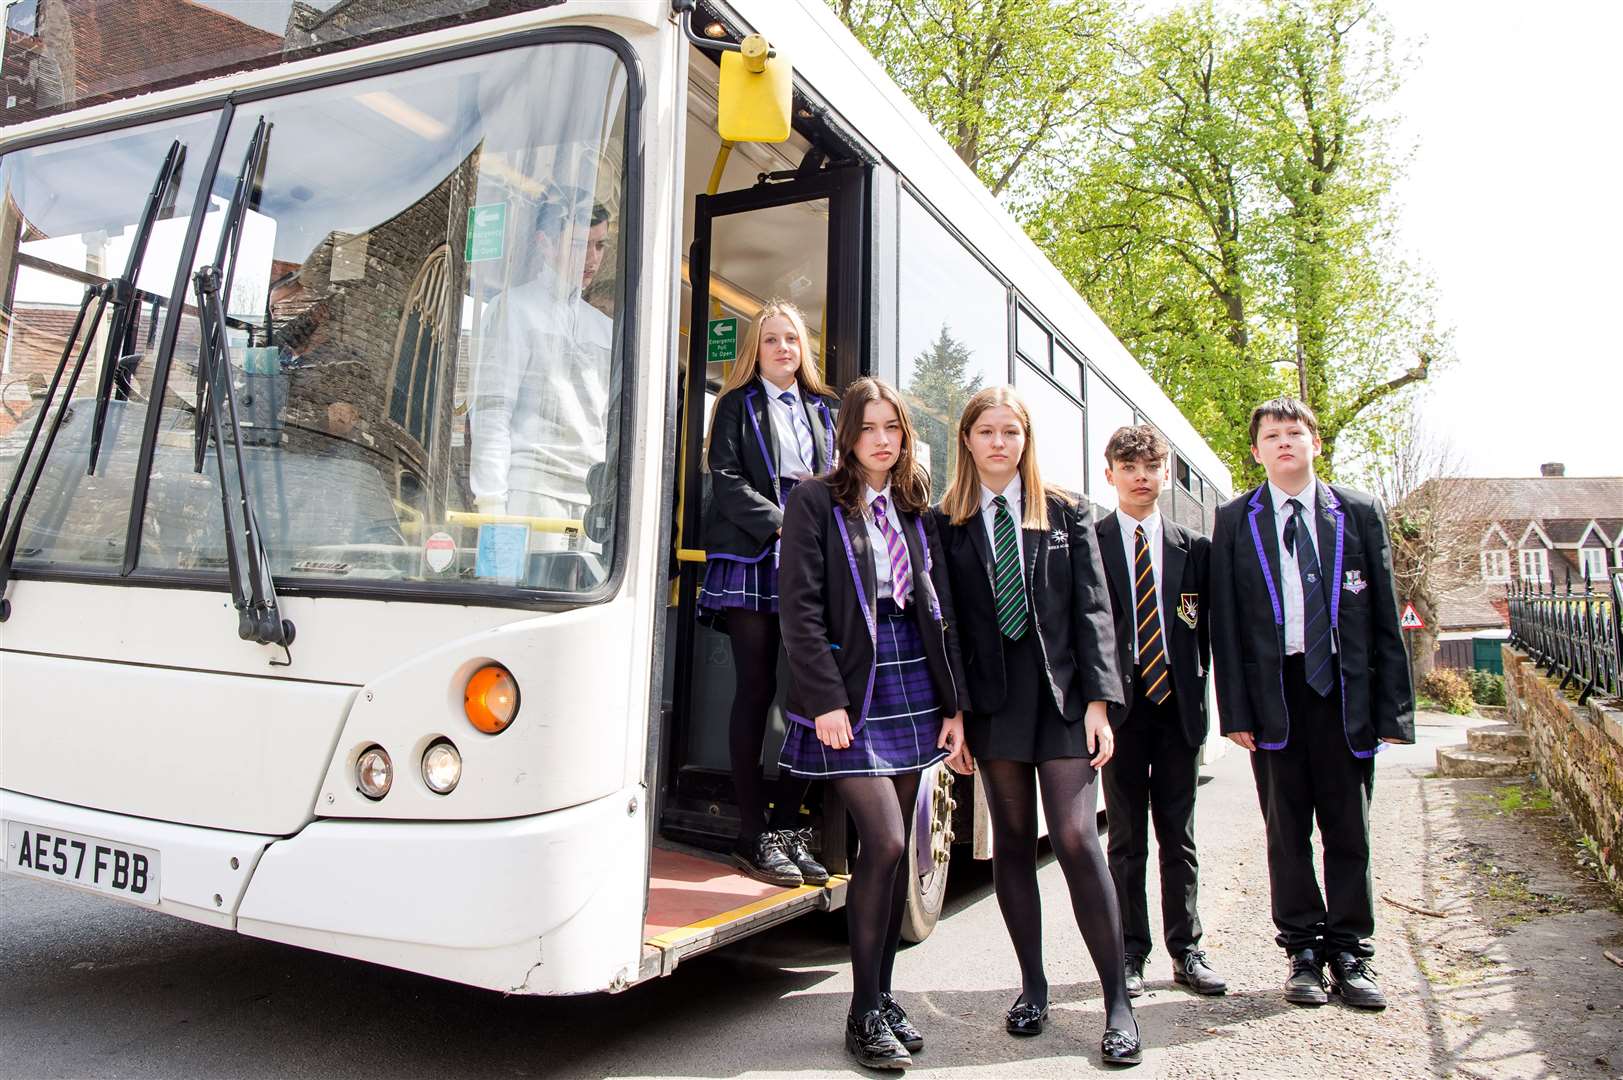 The Go Coach route from Edenbridge to Ide Hill, transports pupils to and from several schools in Sevenoaks